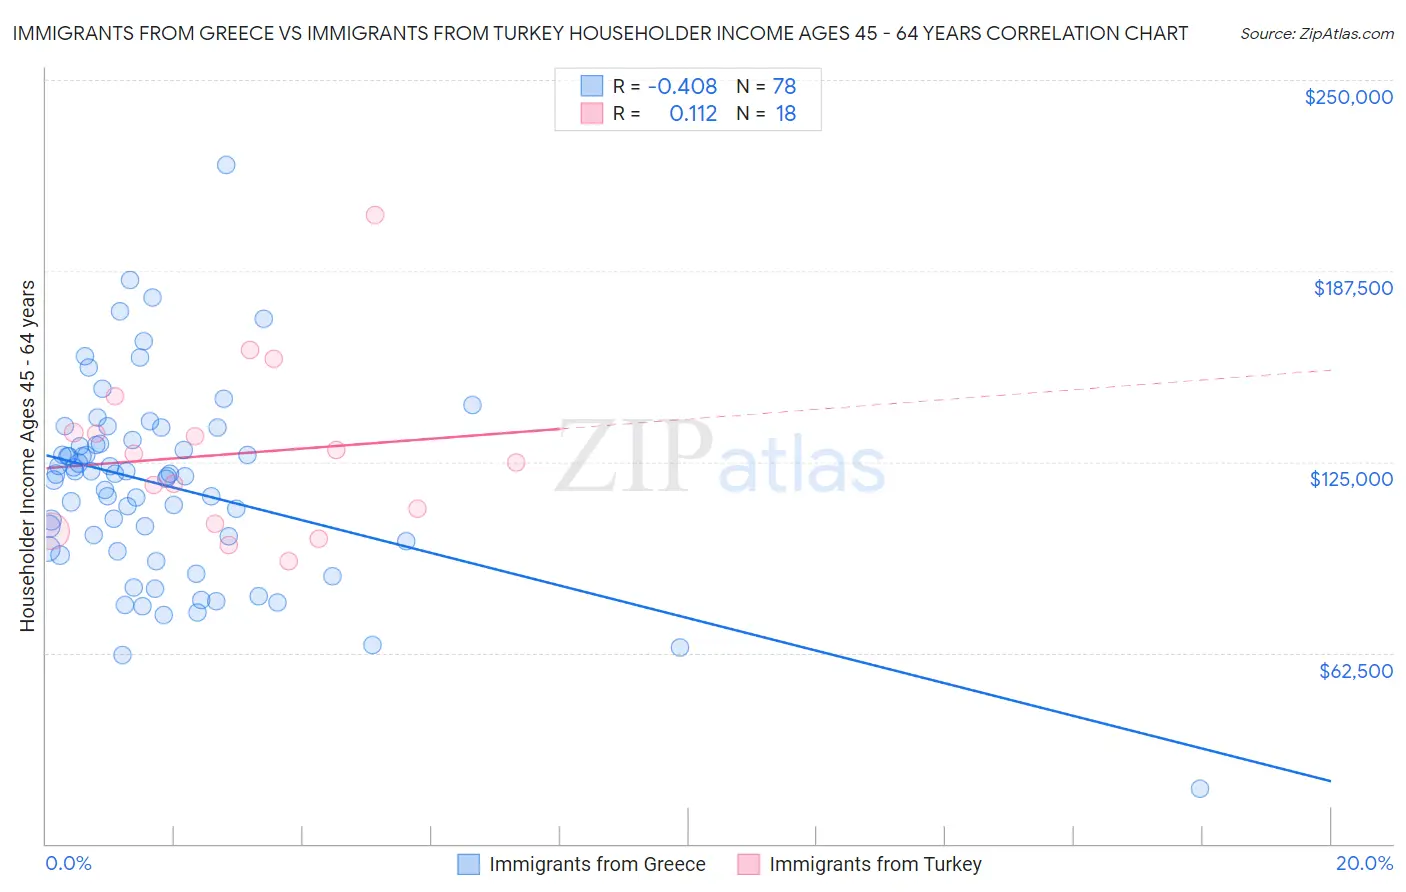 Immigrants from Greece vs Immigrants from Turkey Householder Income Ages 45 - 64 years